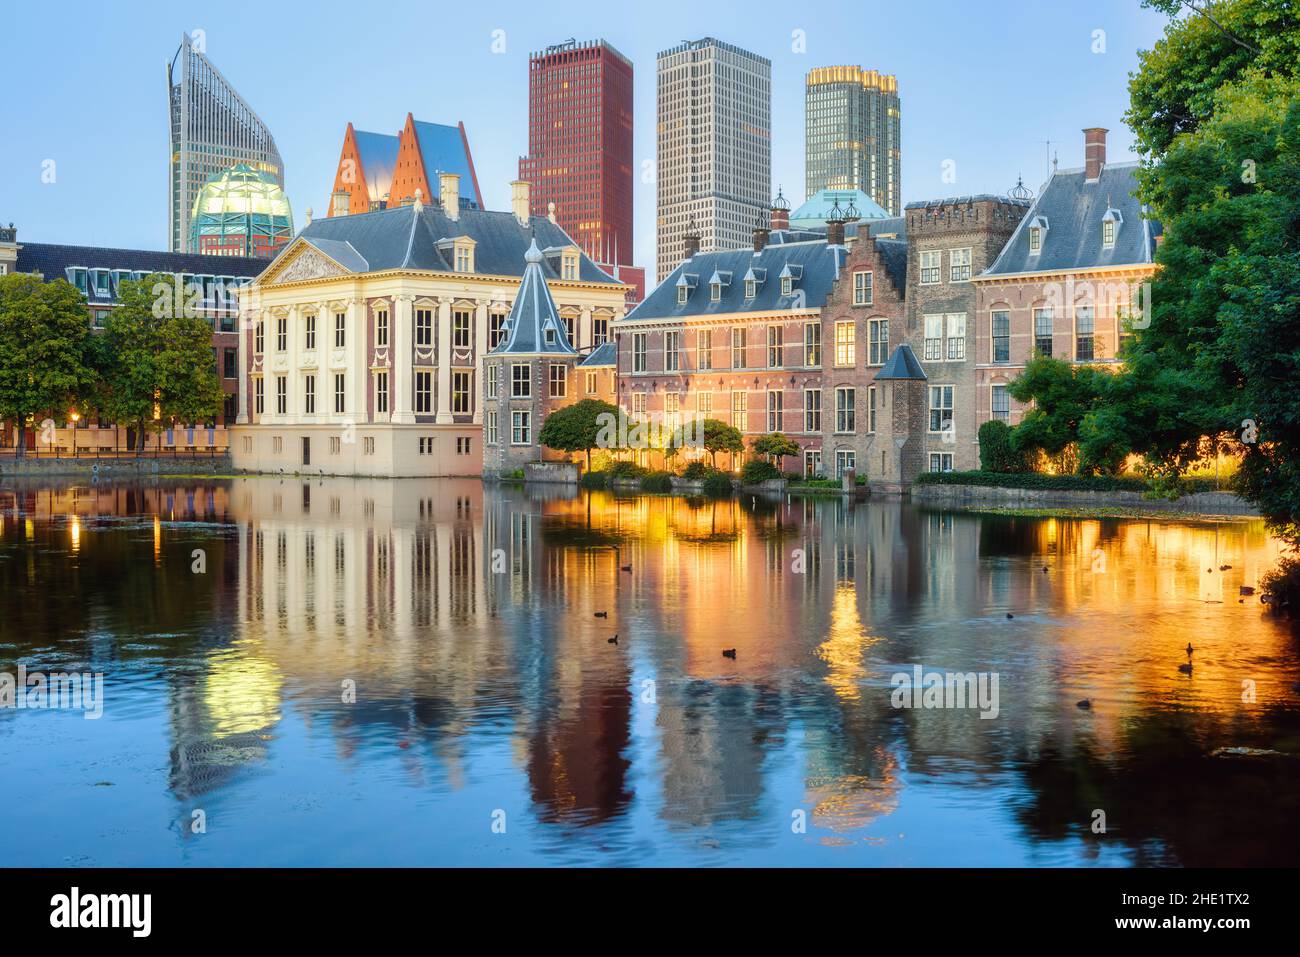 The Hague city center, South Holland, Netherlands, view of the Binnenhof castle, Mauritshuis museum and the modern skyscrapers skyline Stock Photo